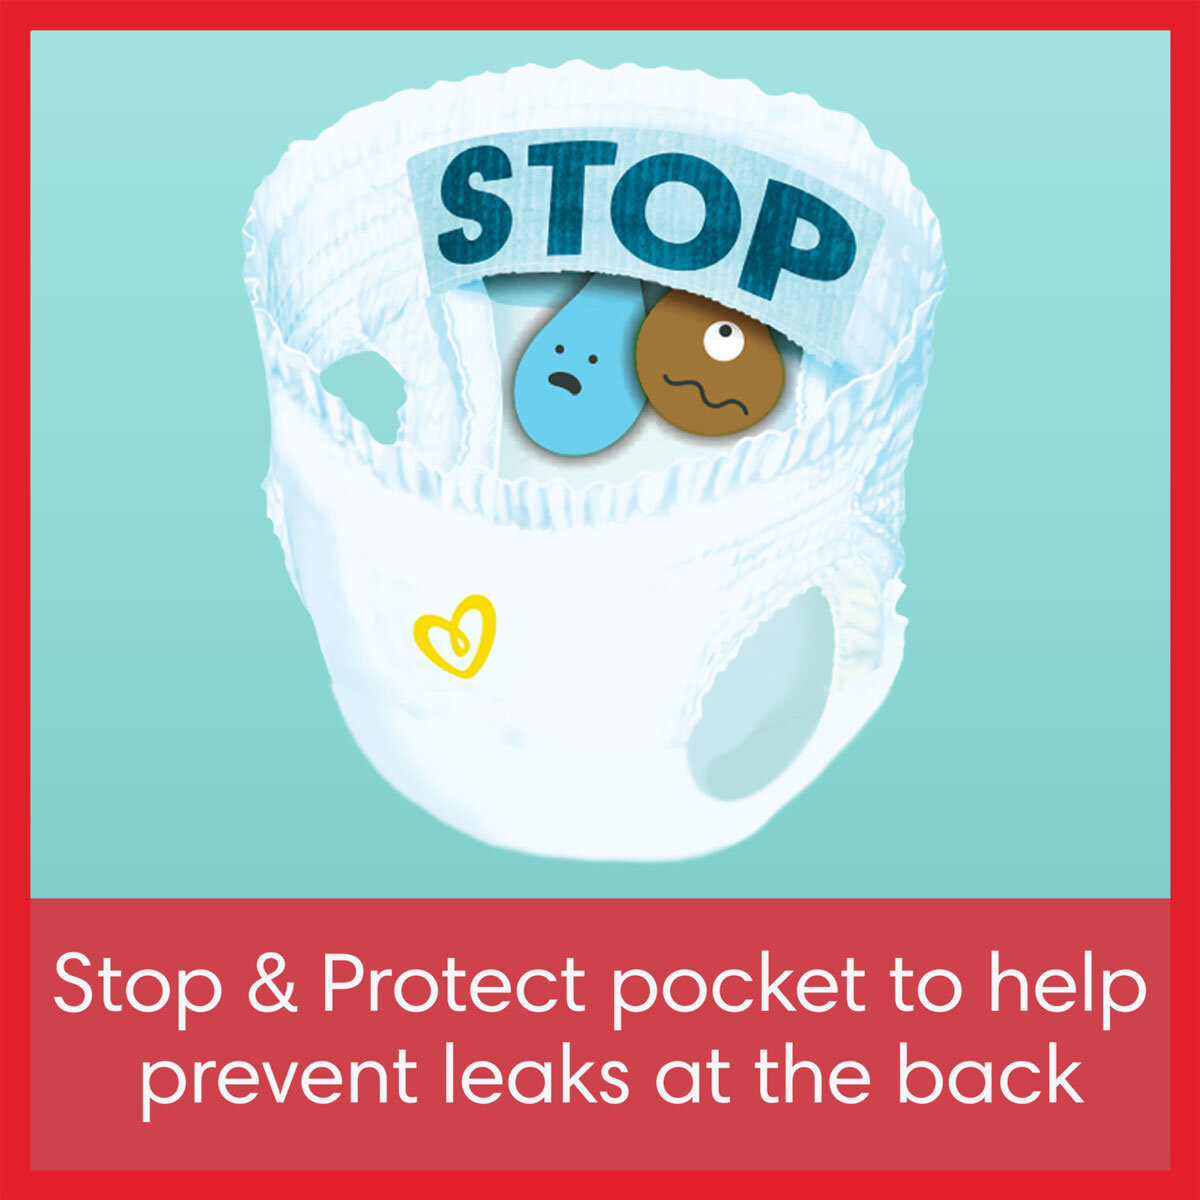 image to show prevent leaks